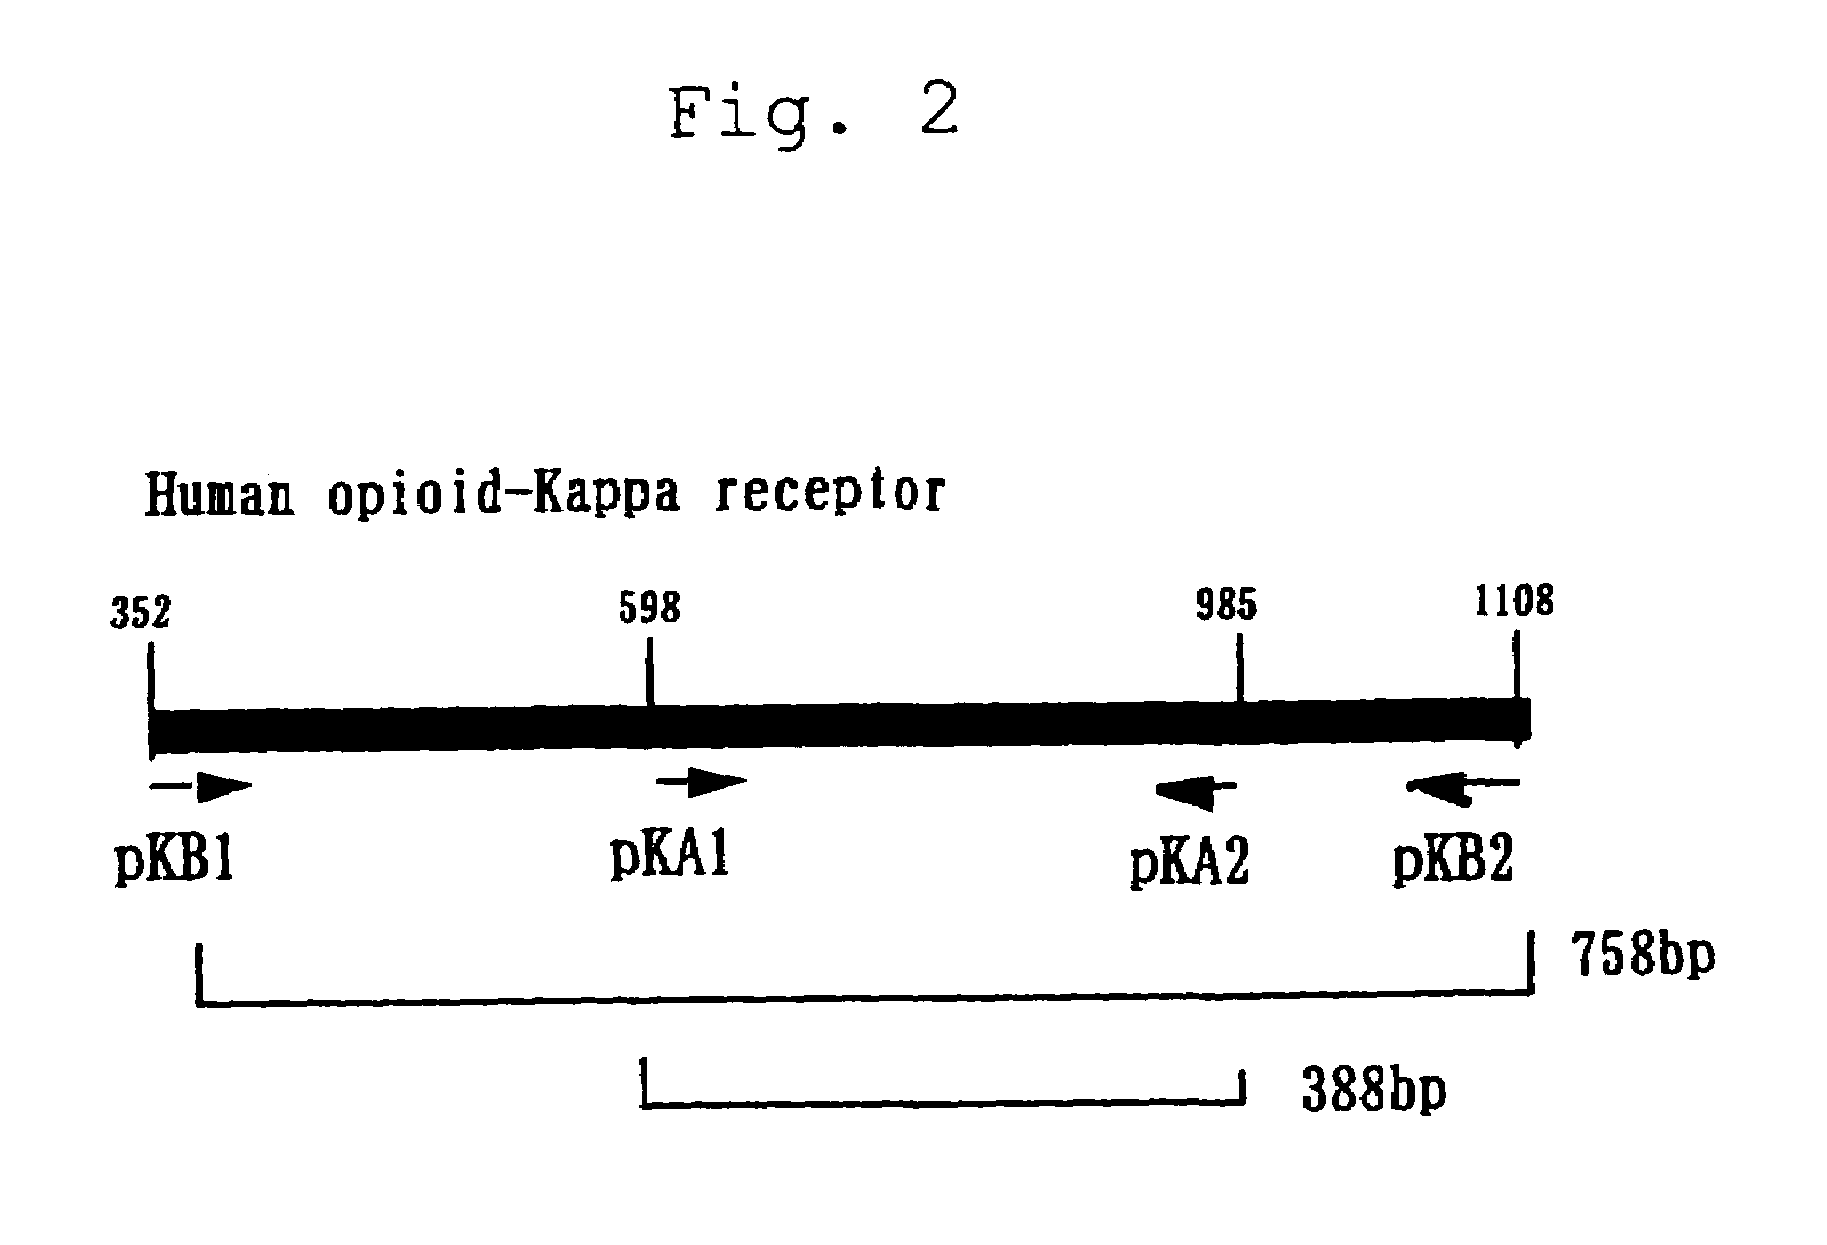 Method for examining the involvement of opioid peptides in prurtis